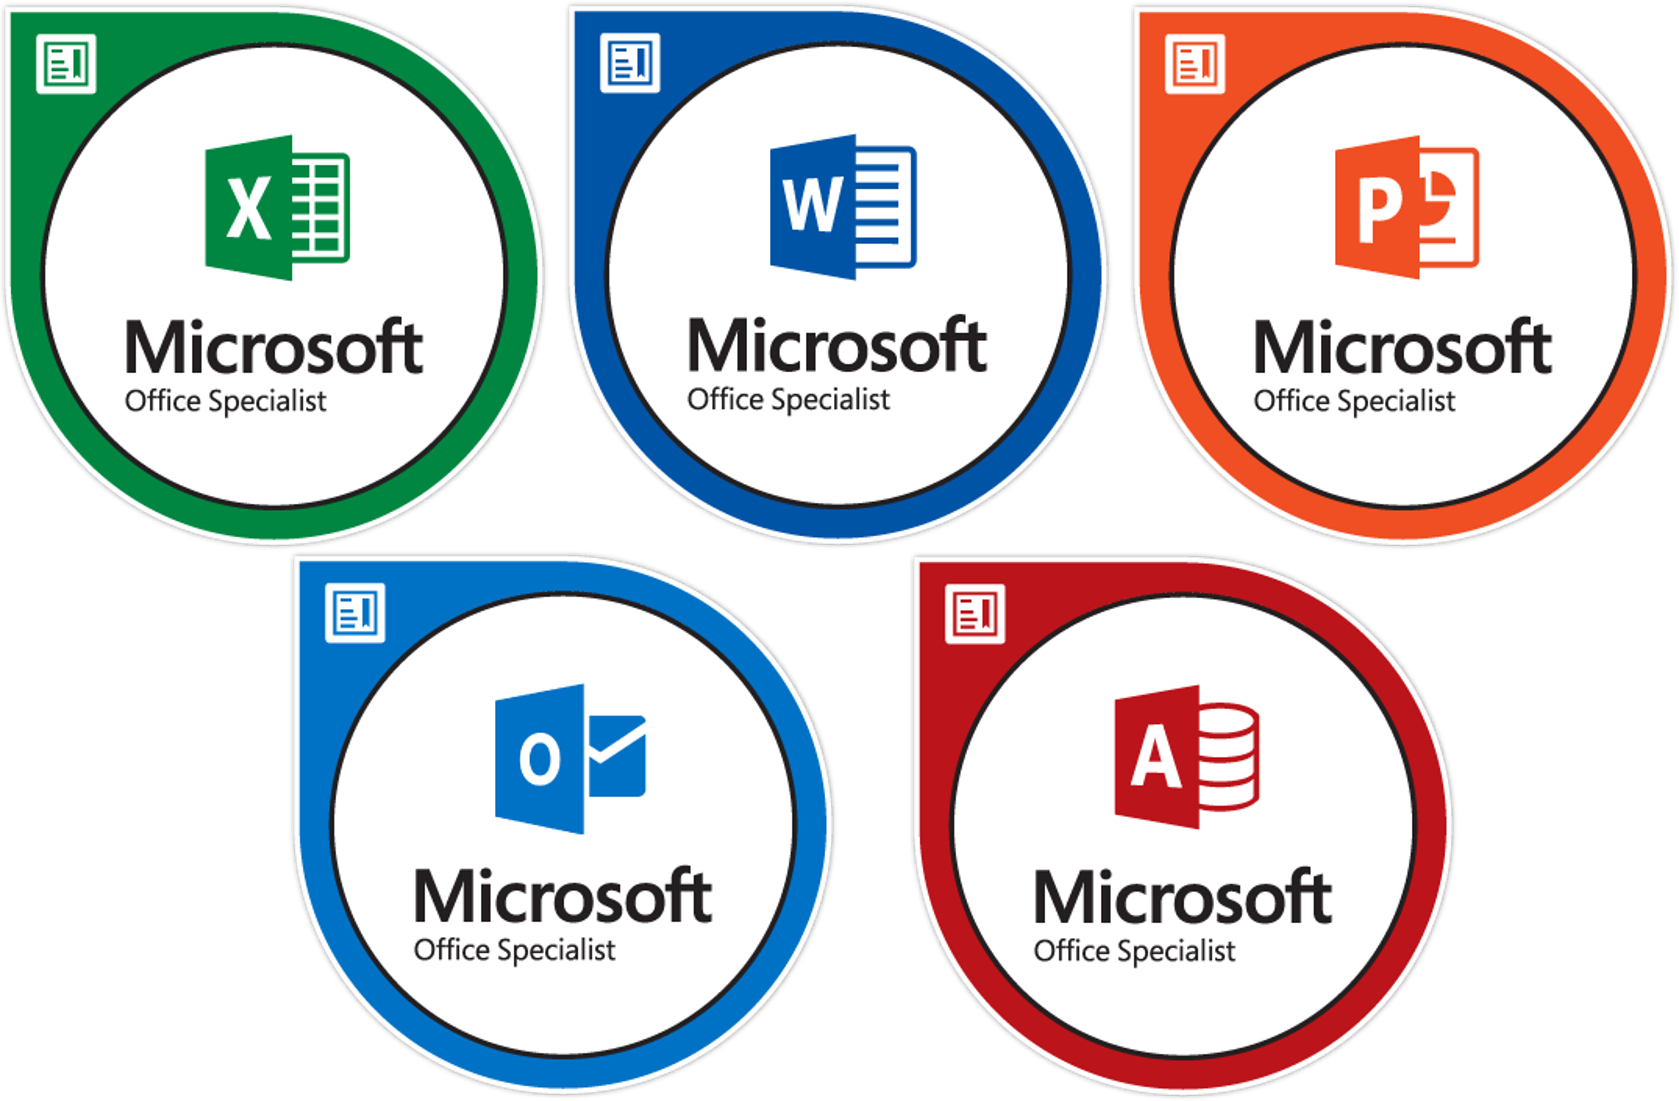 Microsoft Office Specialist badges-Excel_Word_PowerPoint_Access_Outlook